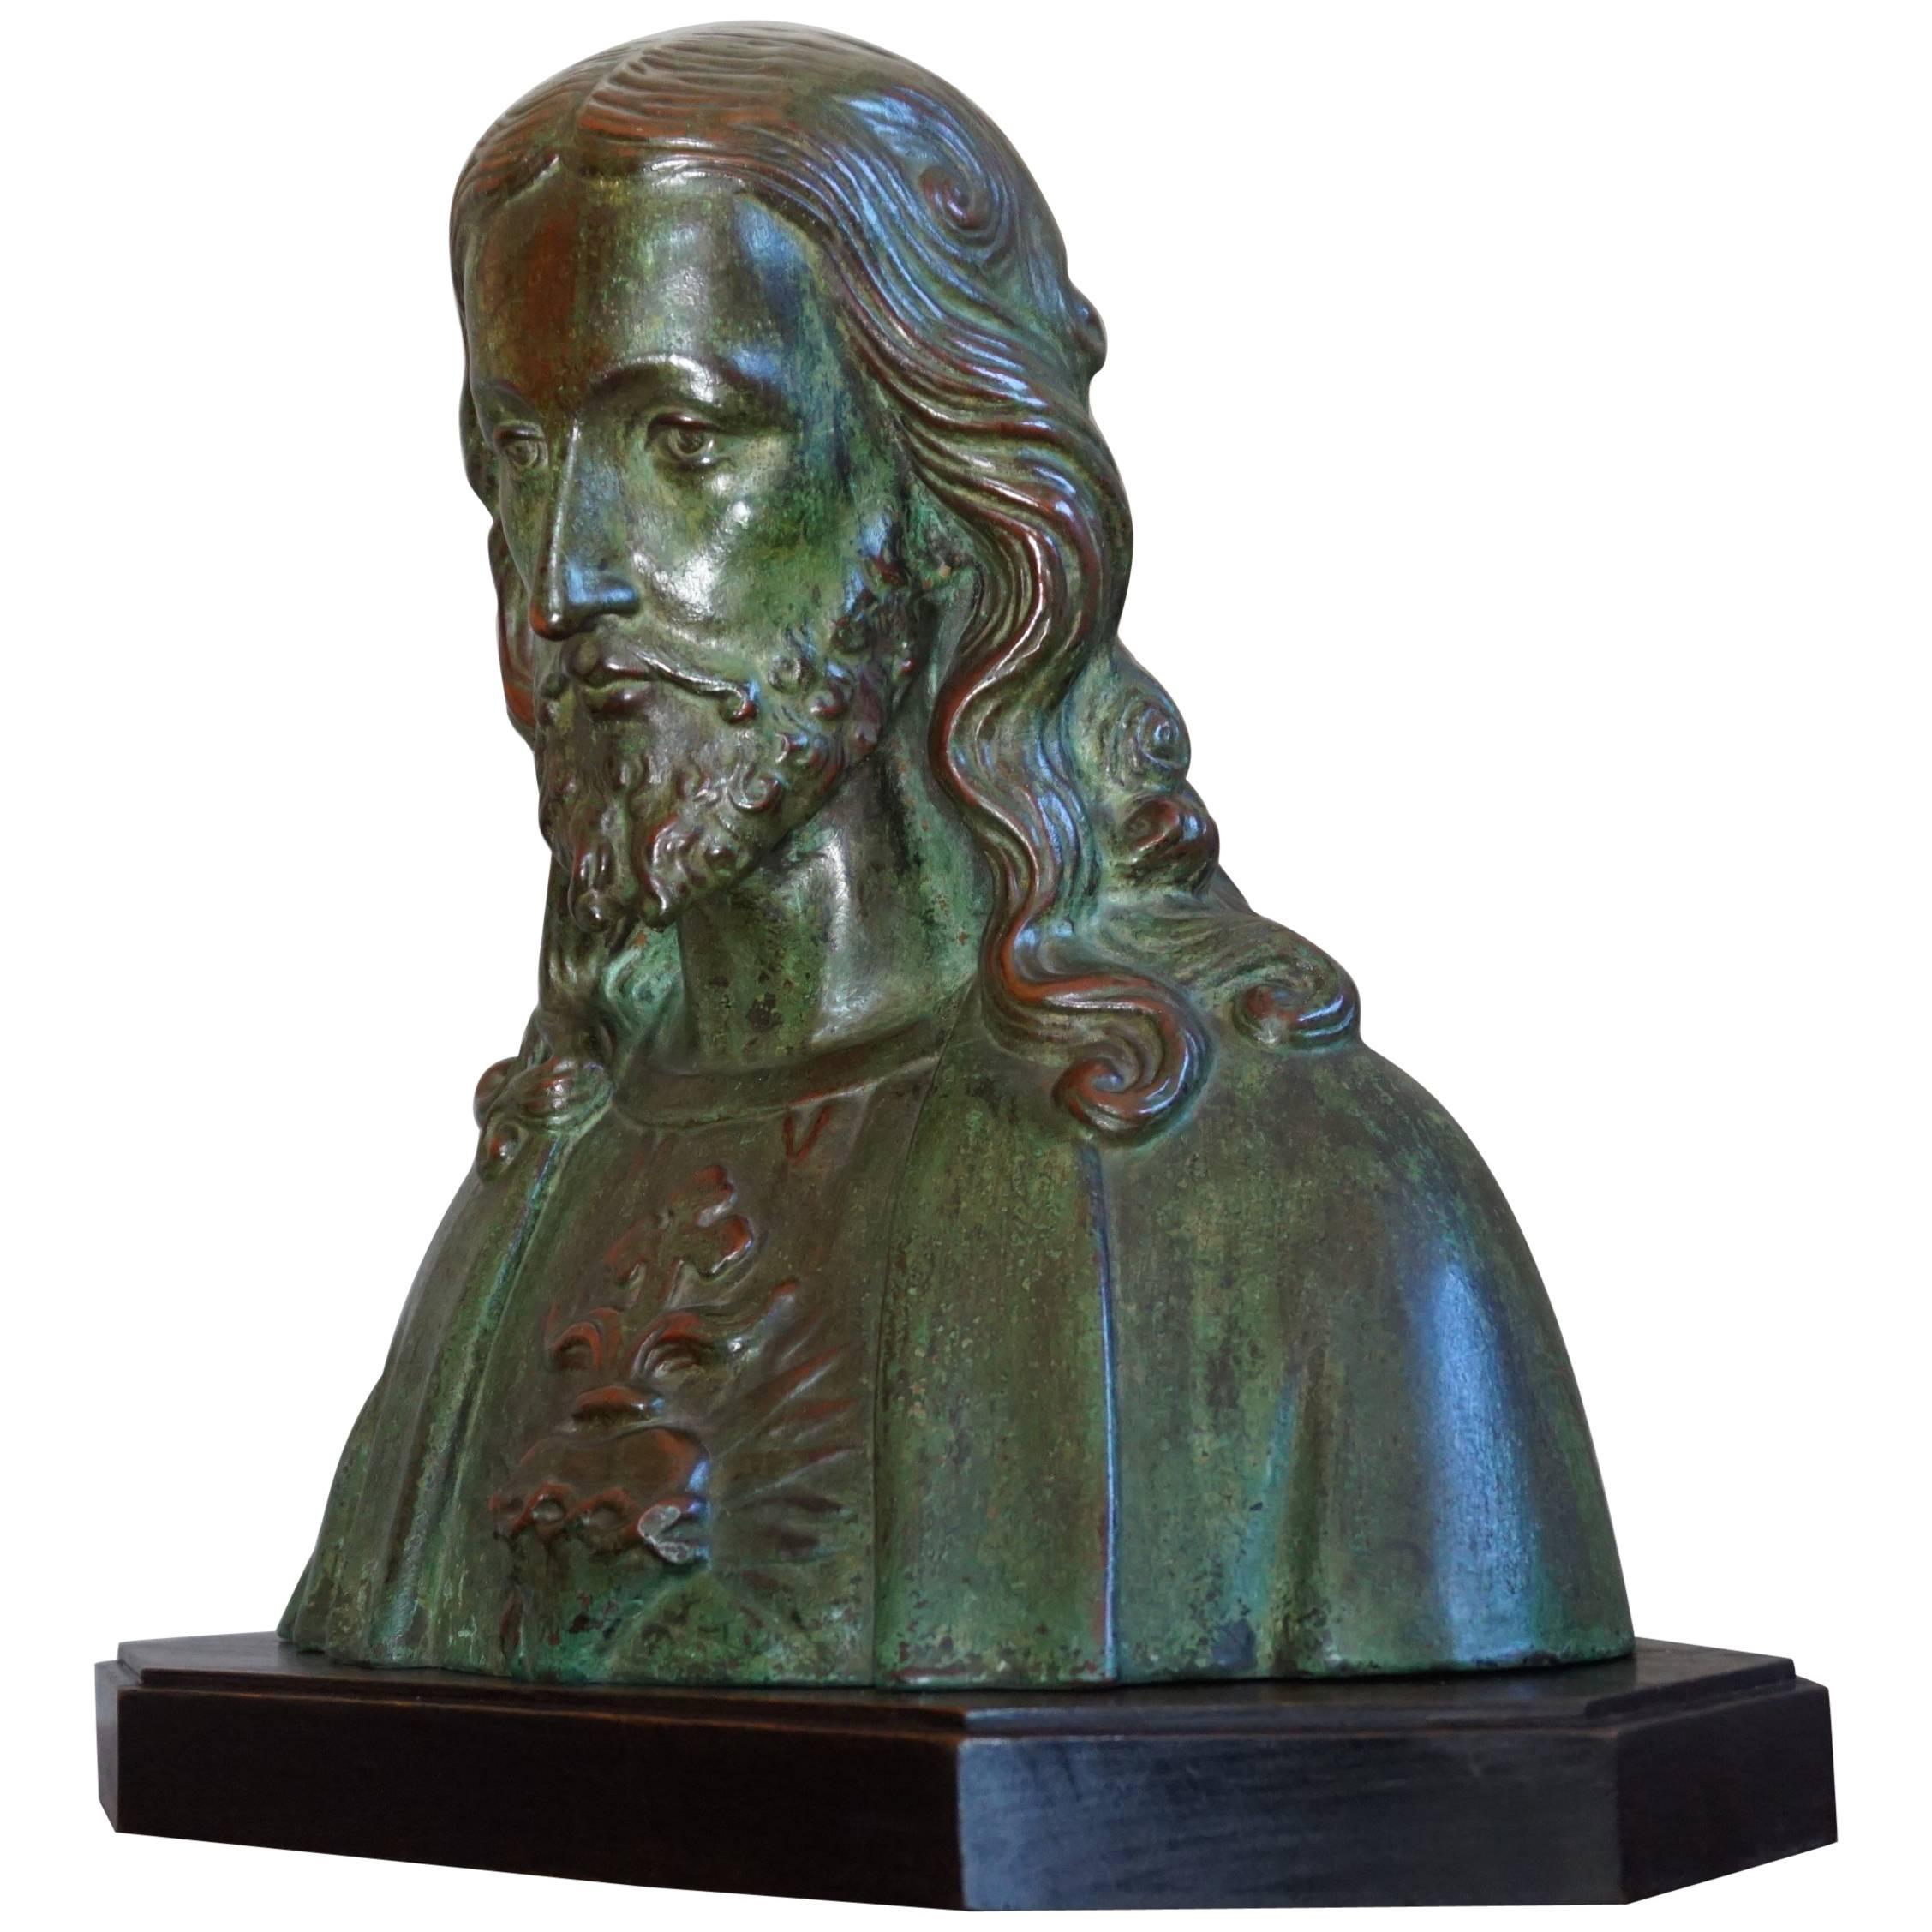 Early 1900s Patinated Terracotta or Plaster Bust of Christ on an Art Deco Base